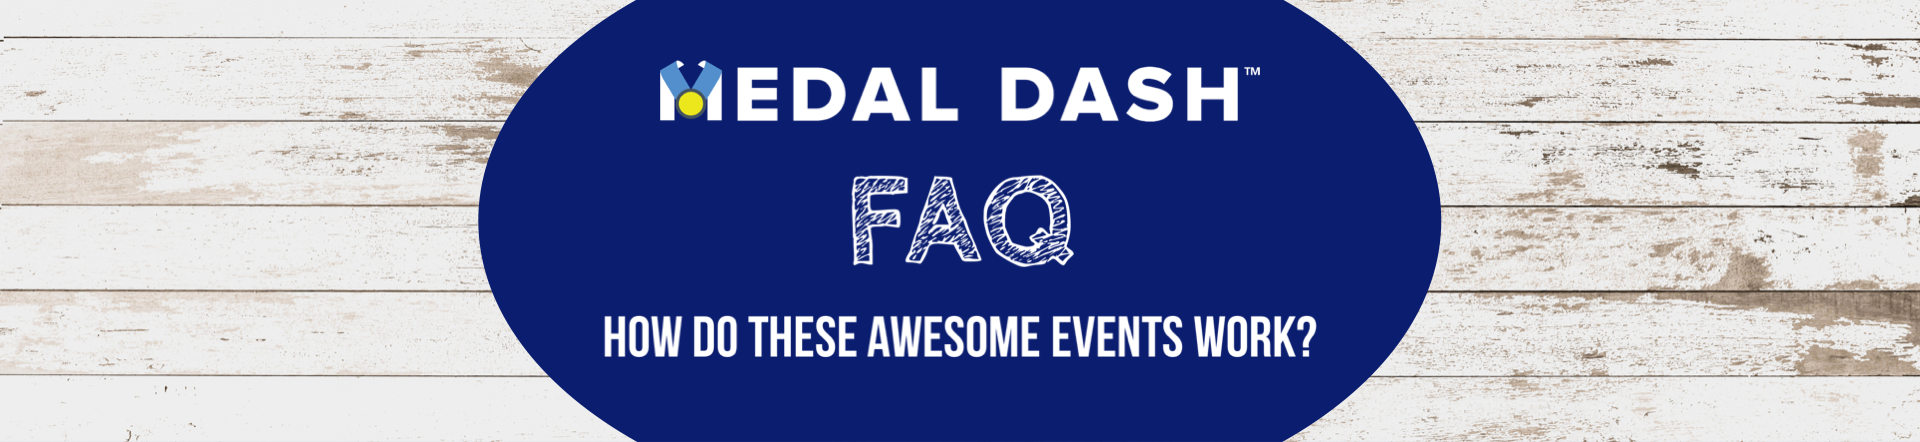 medal dash questions and answers page - how do these awesome events work?